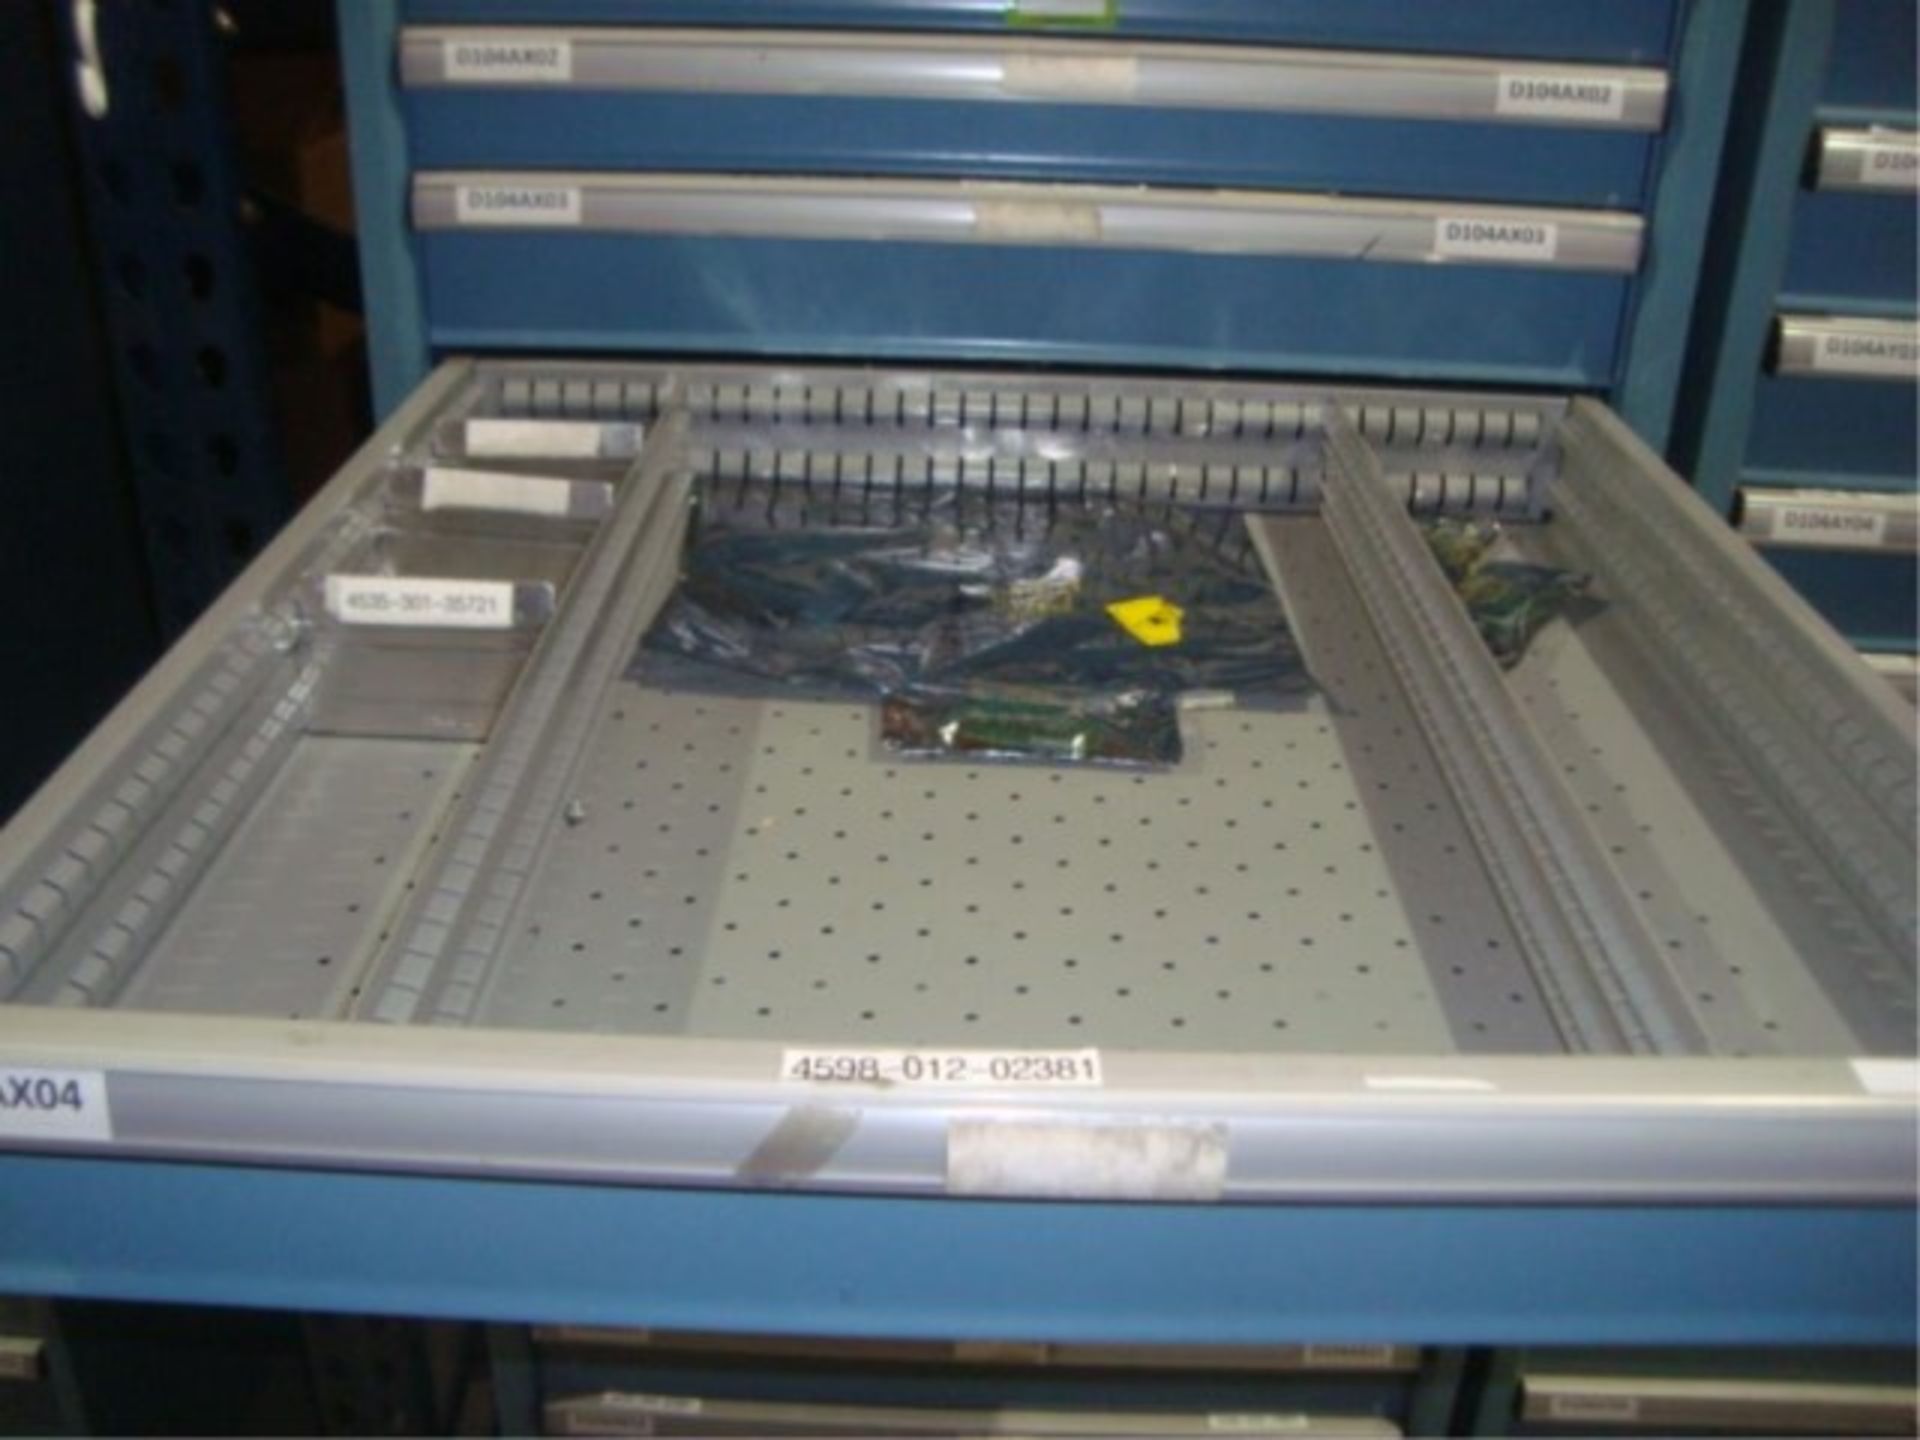 13-Drawer Parts Supply Cabinet - Image 3 of 6